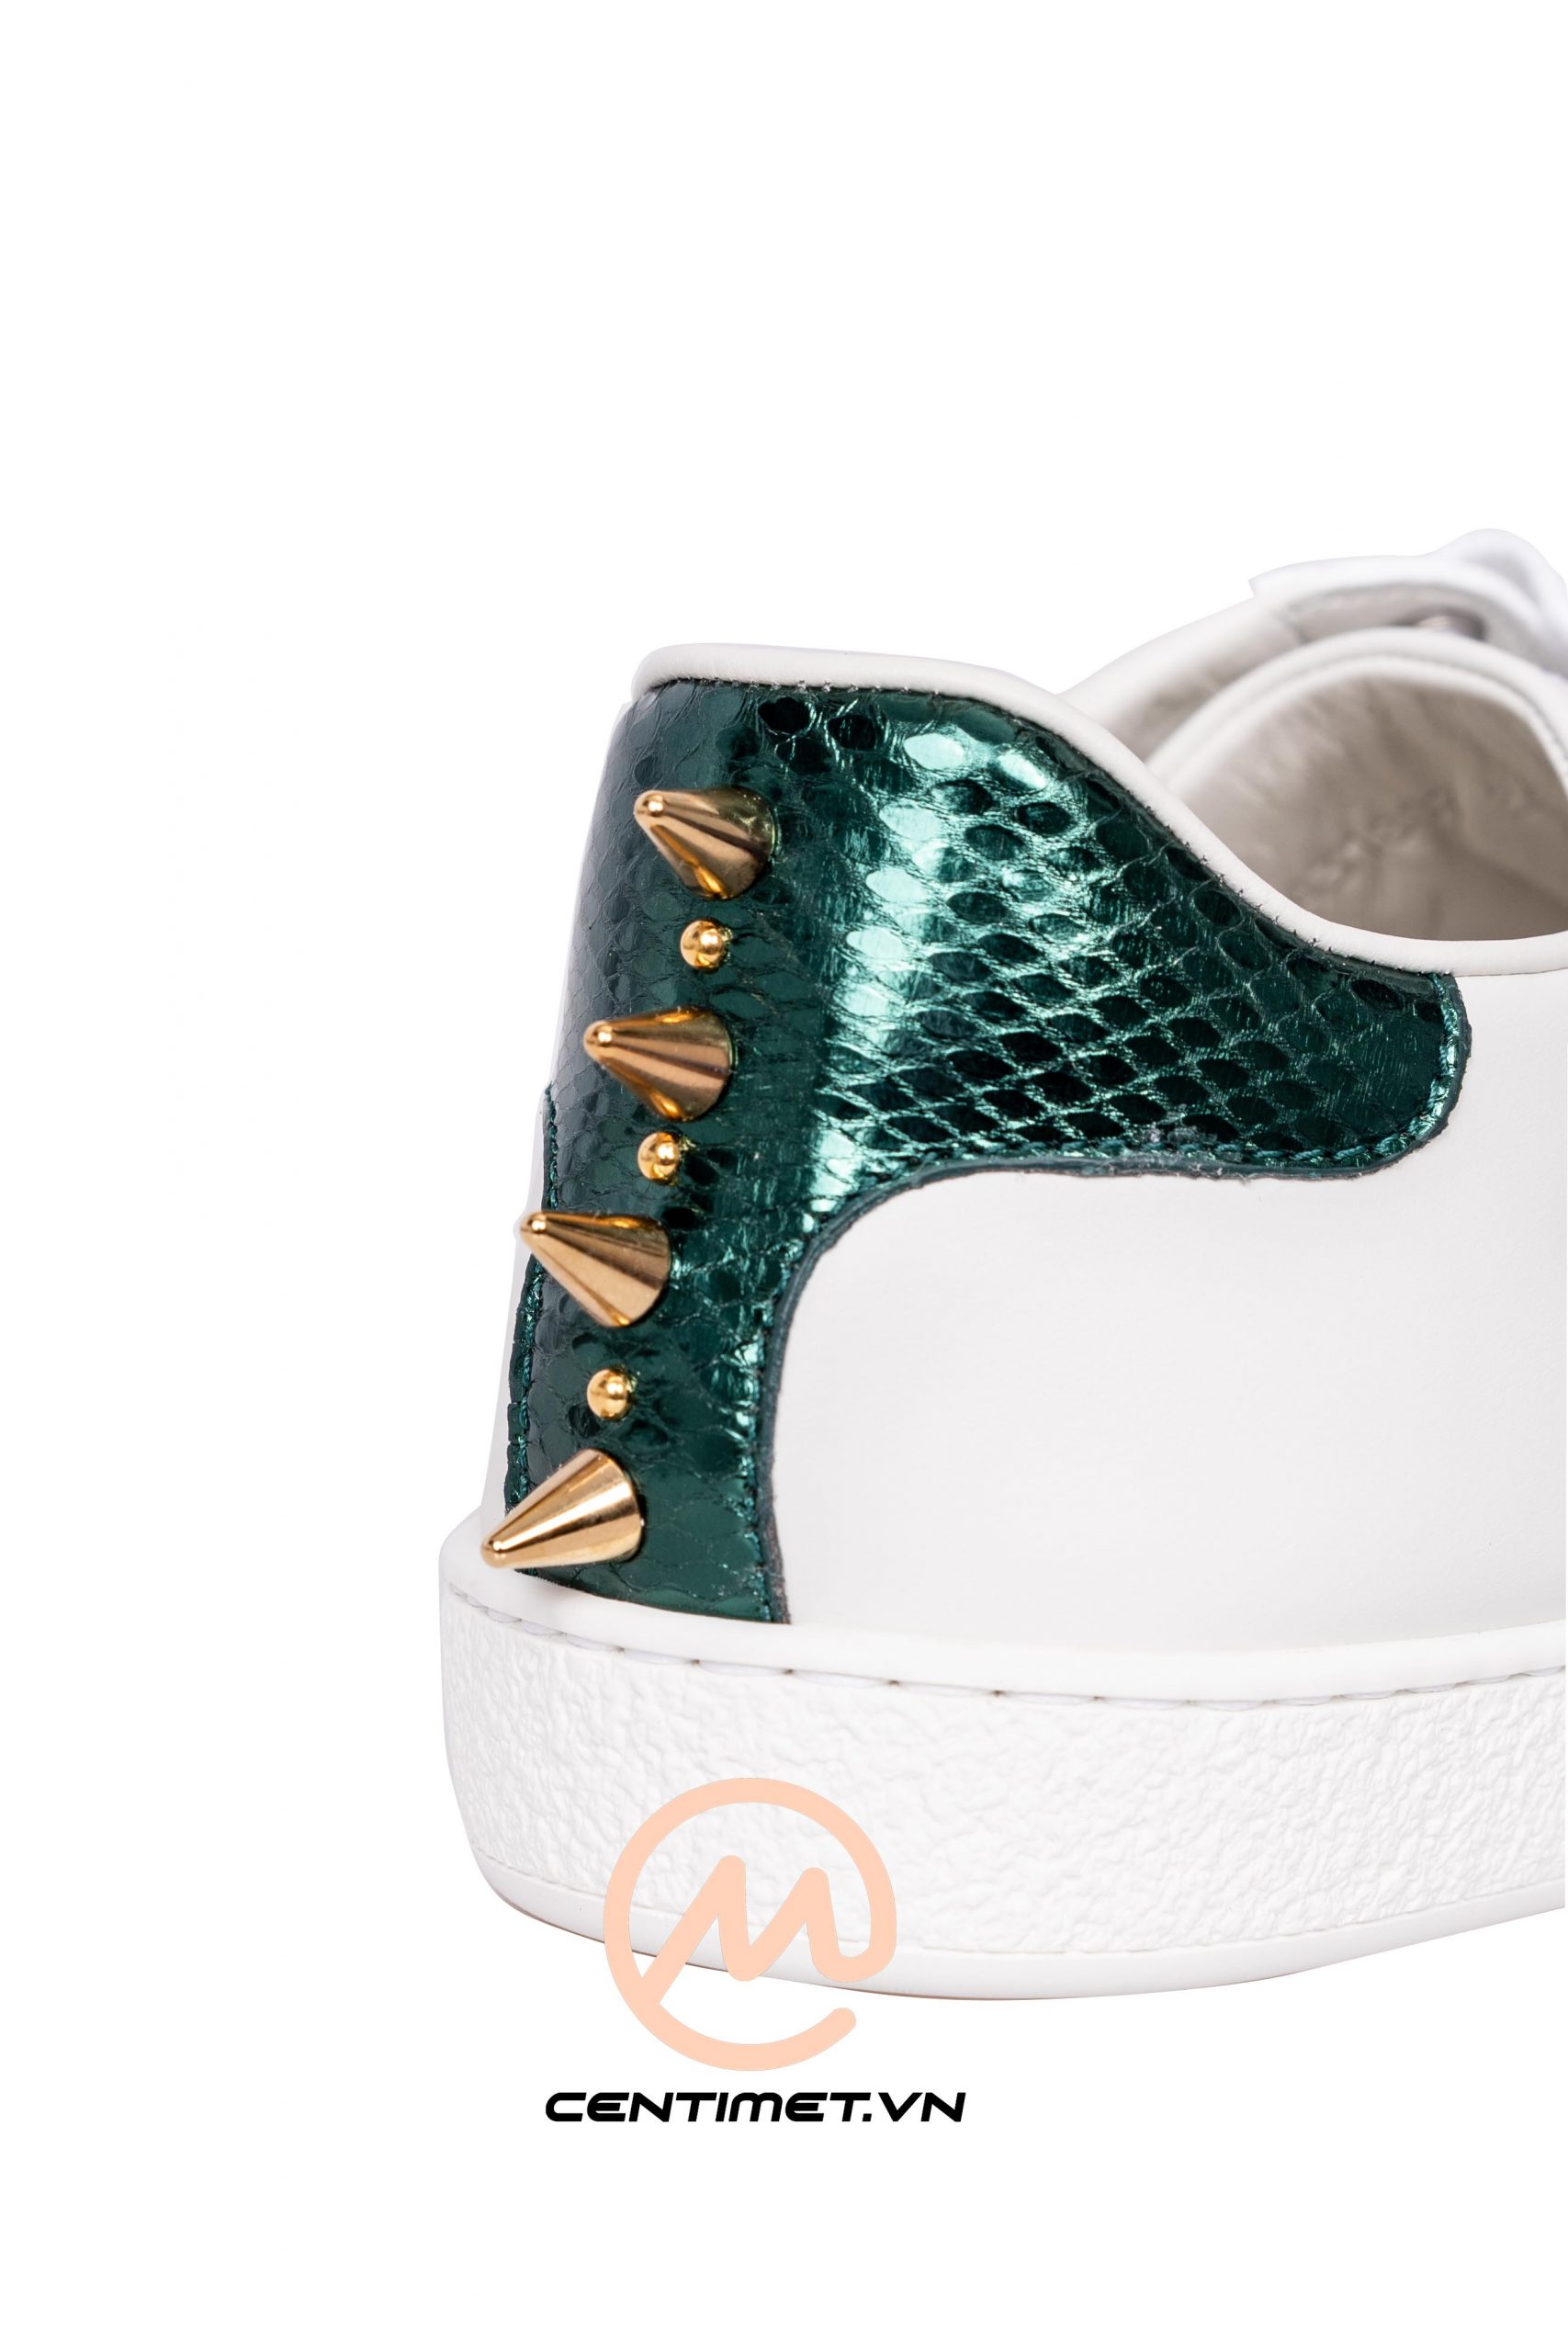 Giày Gucci Ace studded leather sneaker (6 of 7)